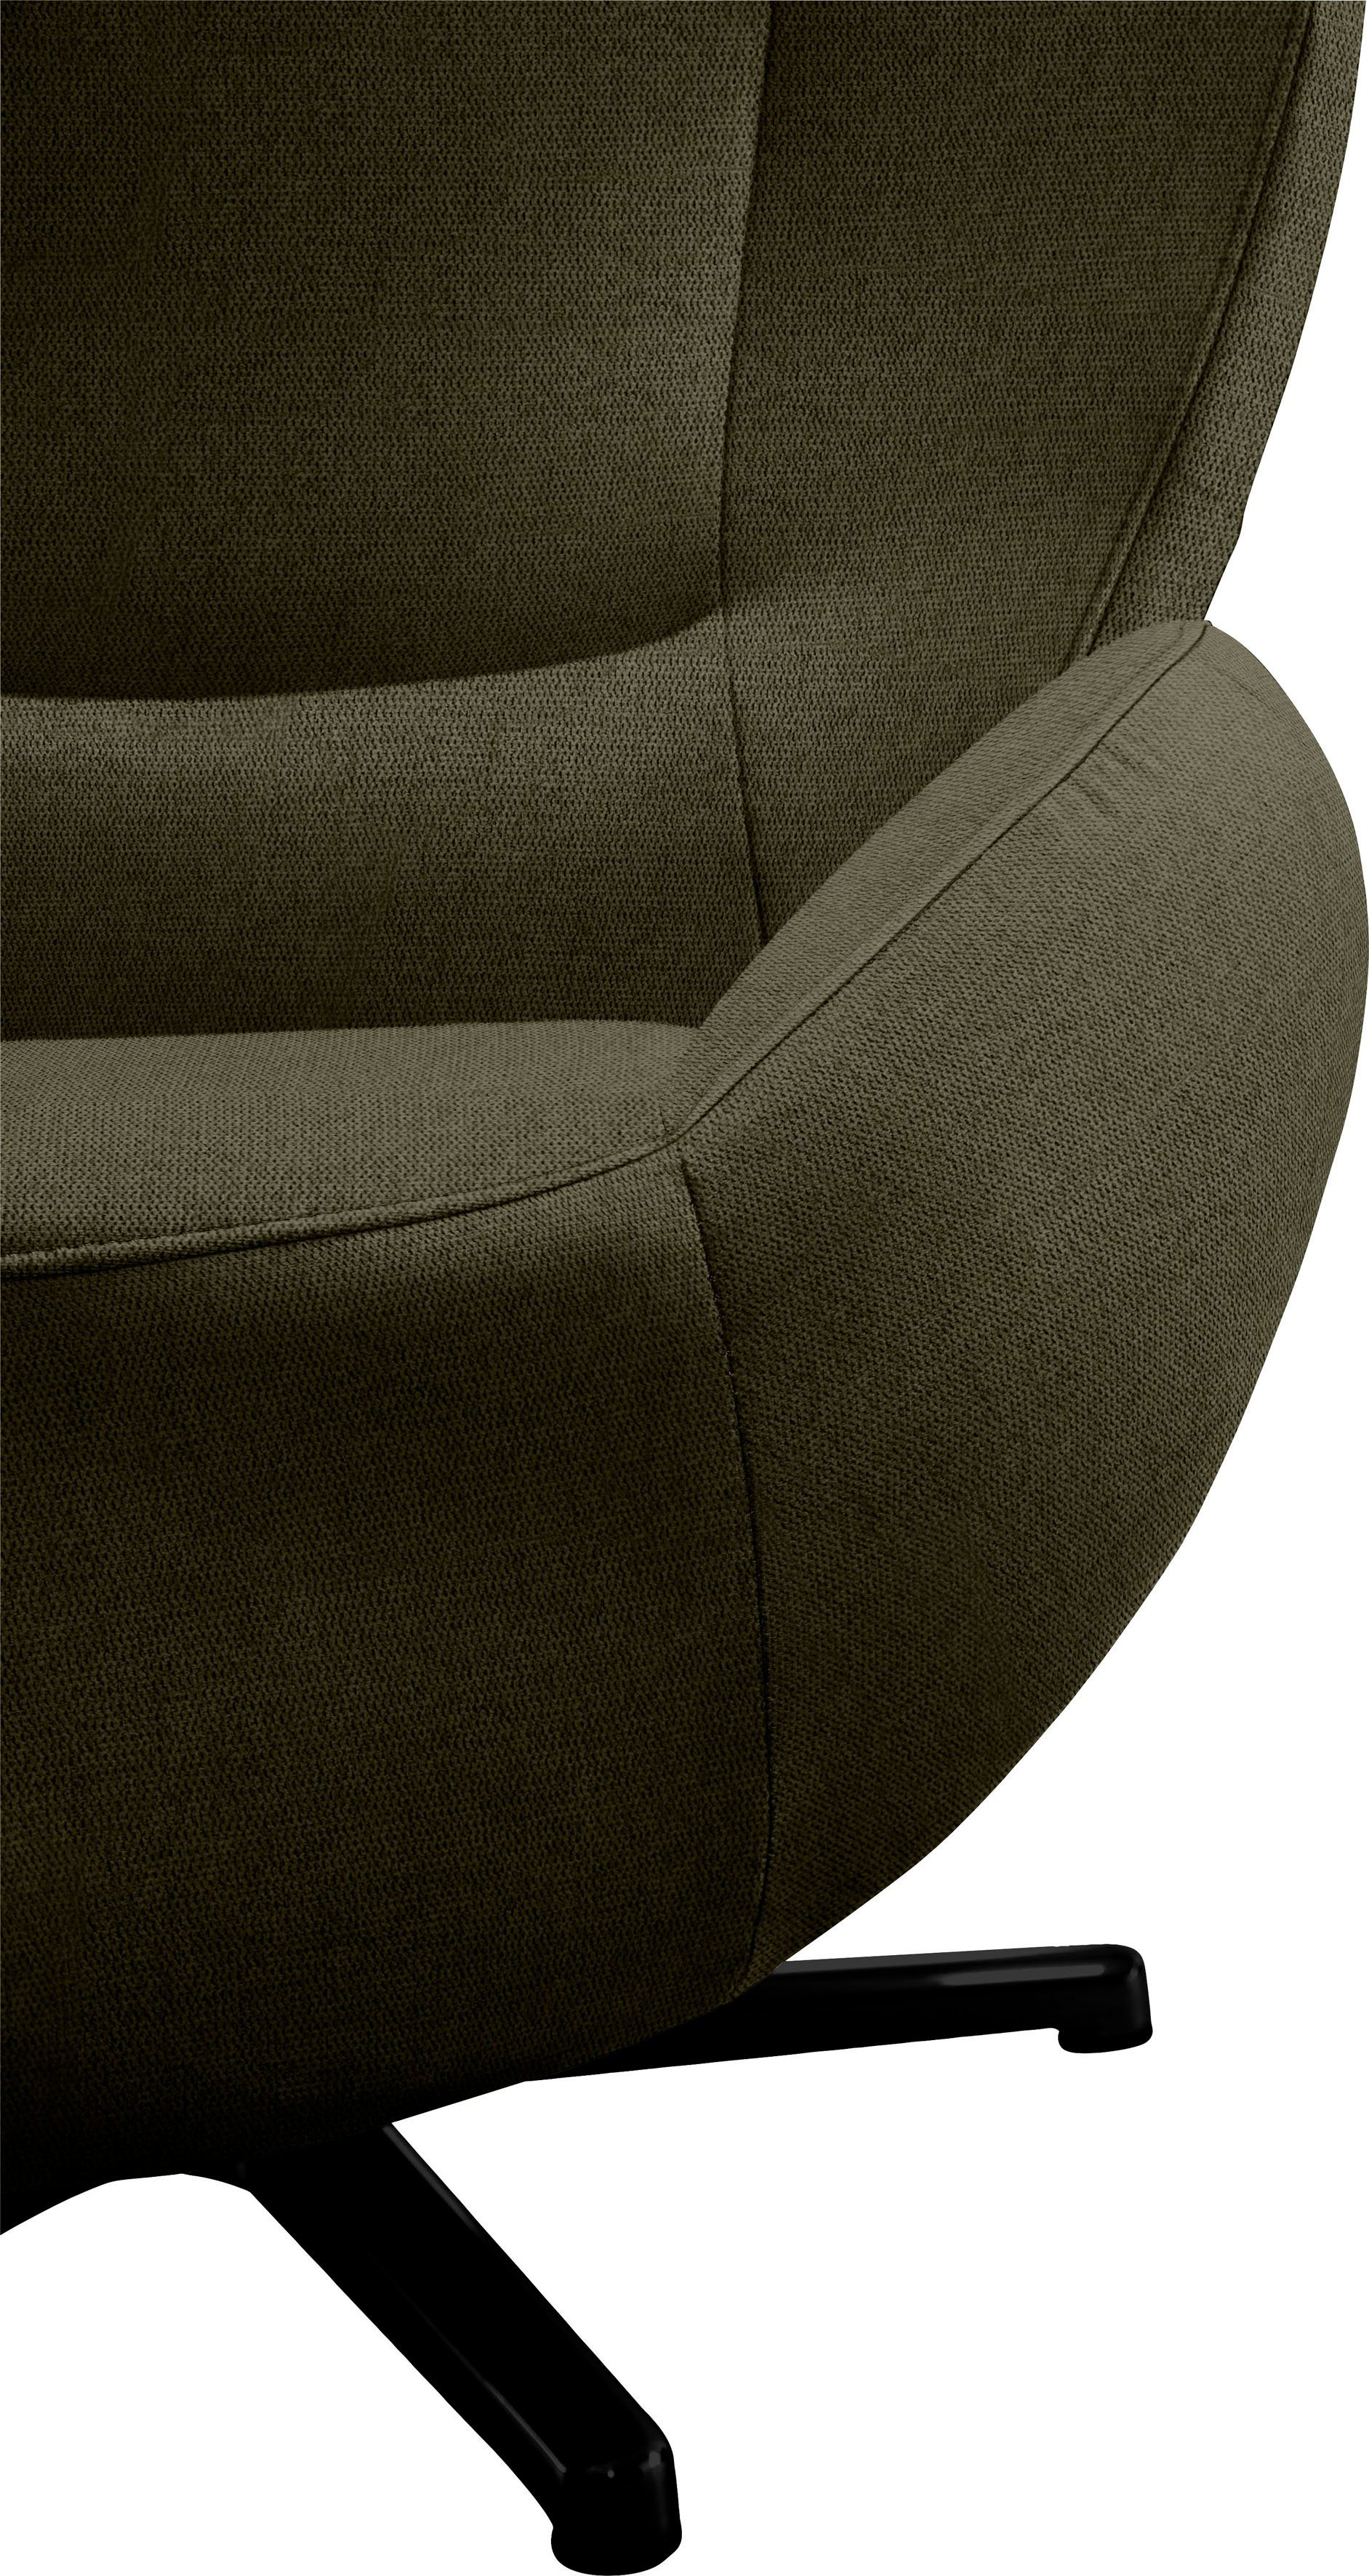 TOM TAILOR in Schwarz Metall-Drehfuß PURE, HOME Loungesessel mit TOM